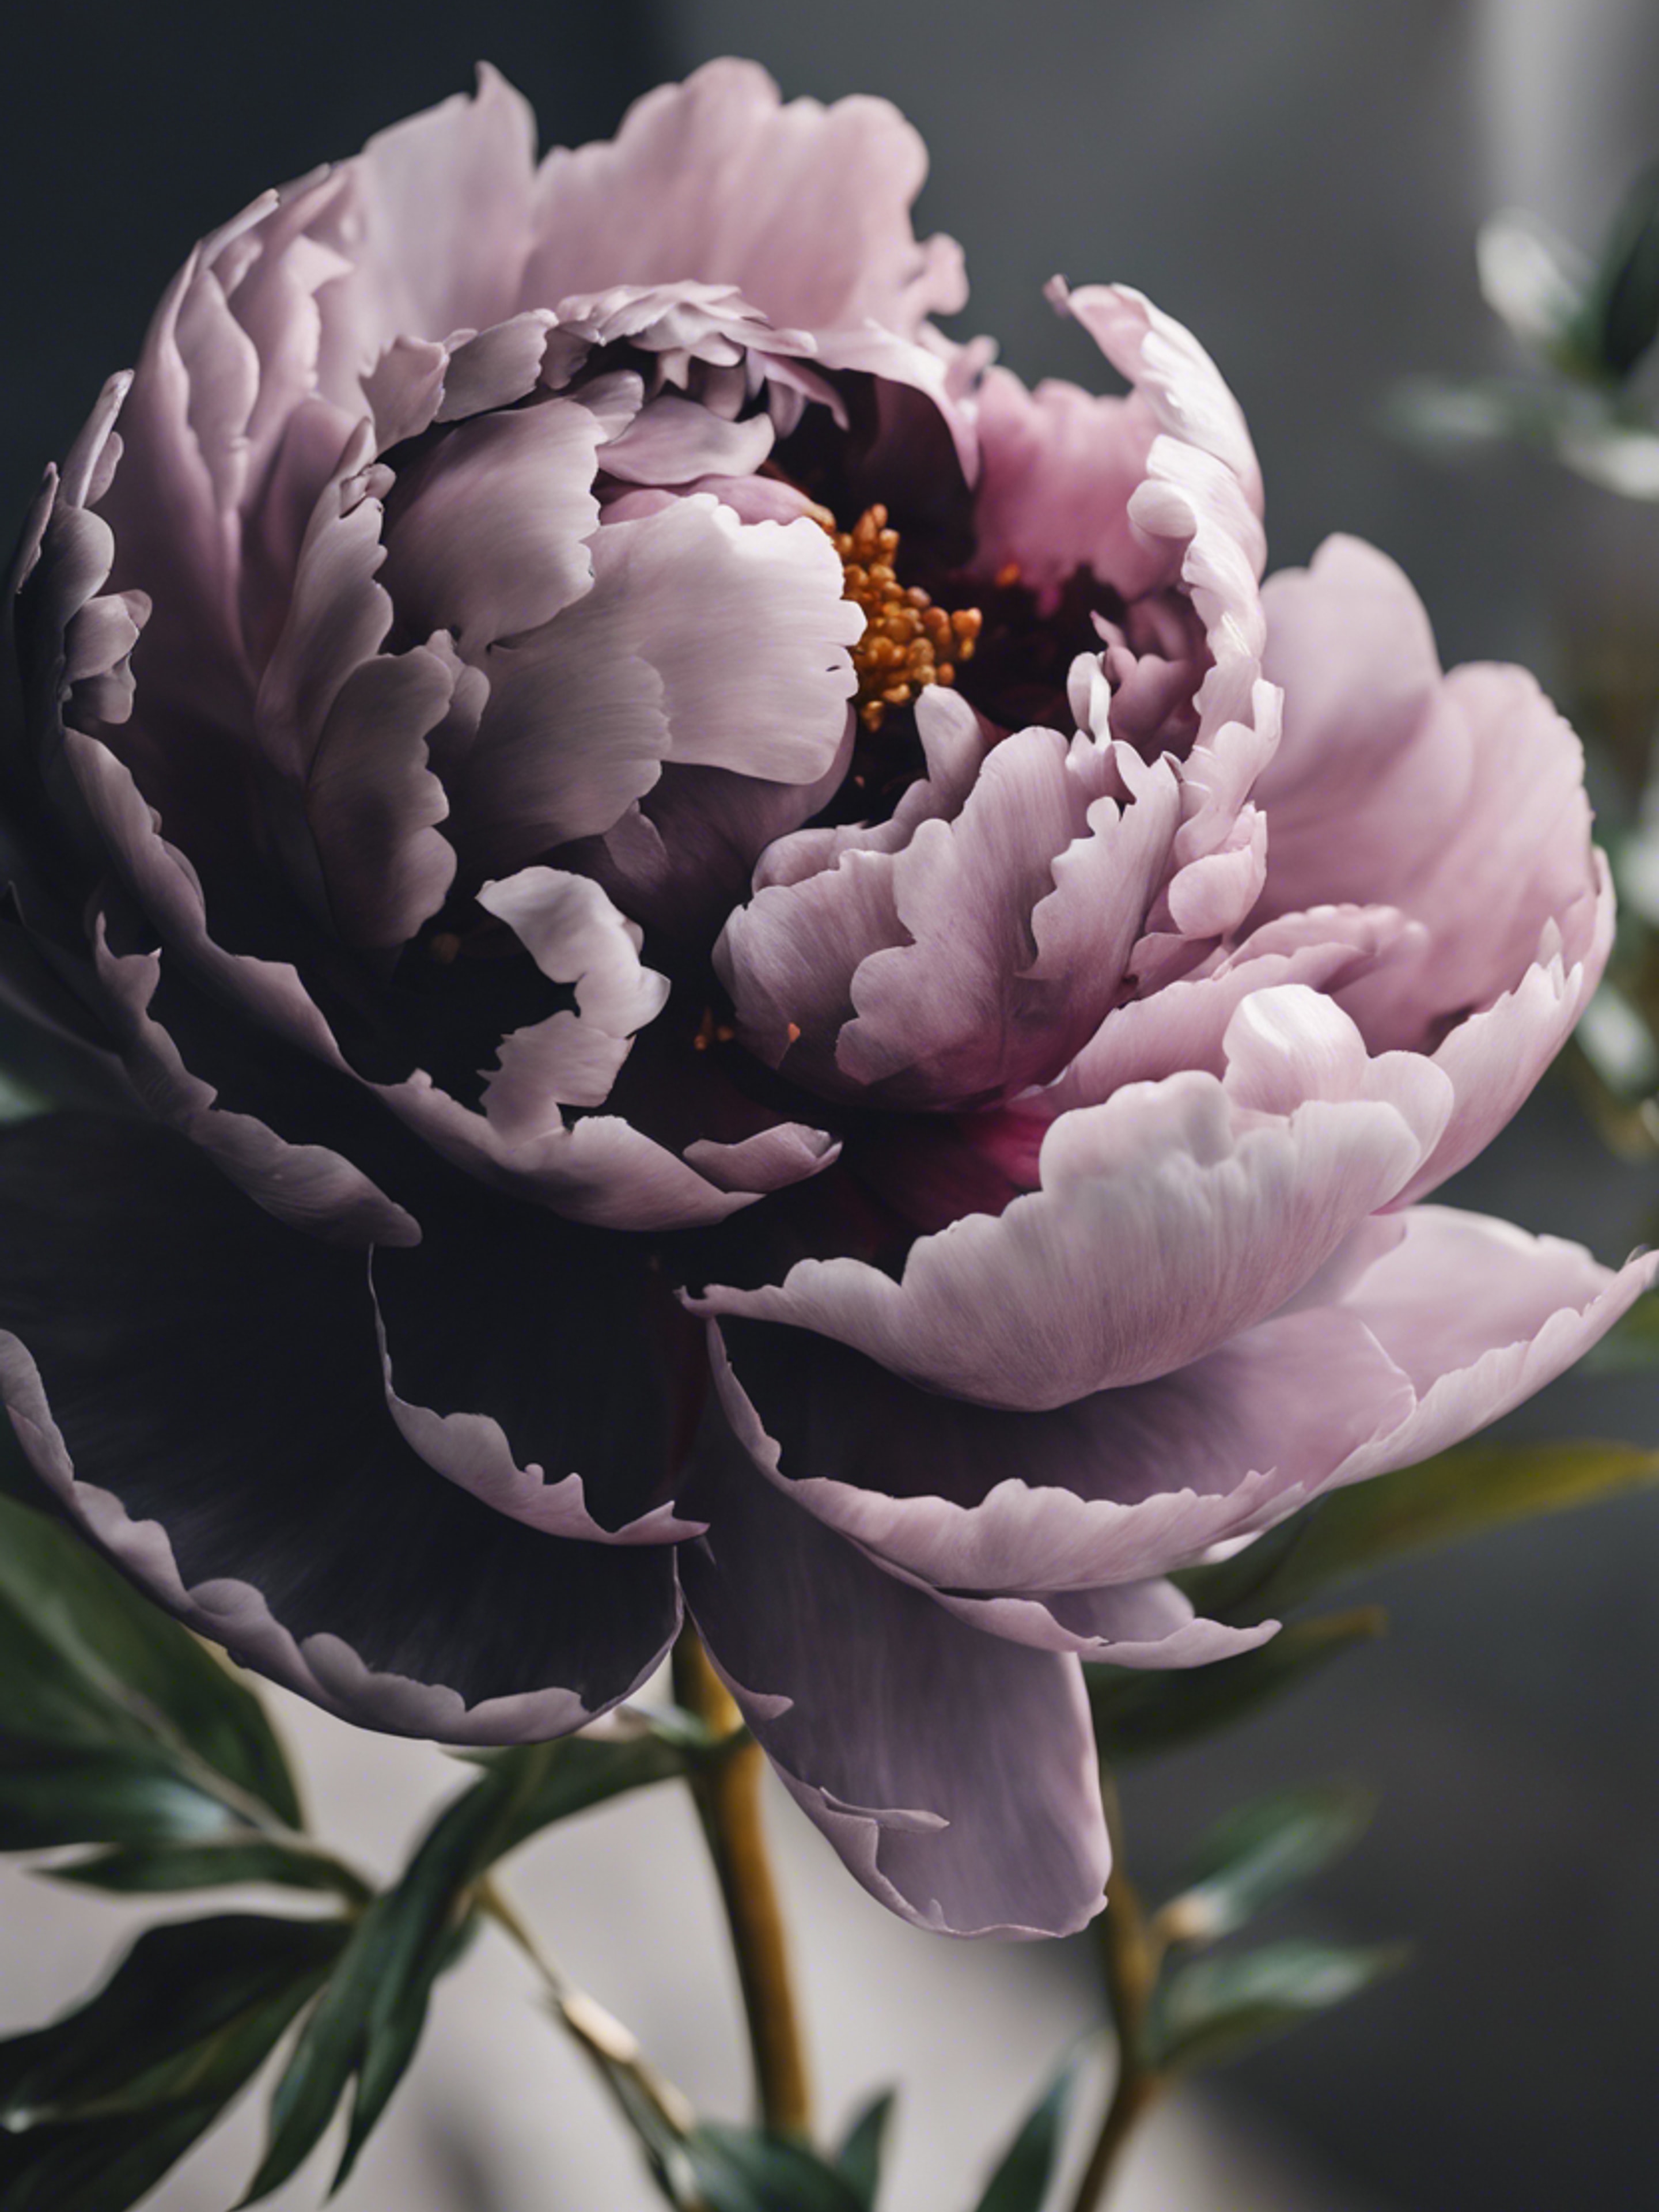 A black peony, the symbol of prosperity and honor, complementing a traditional Asian painting. Hintergrund[2c78f74174874eadaf7e]